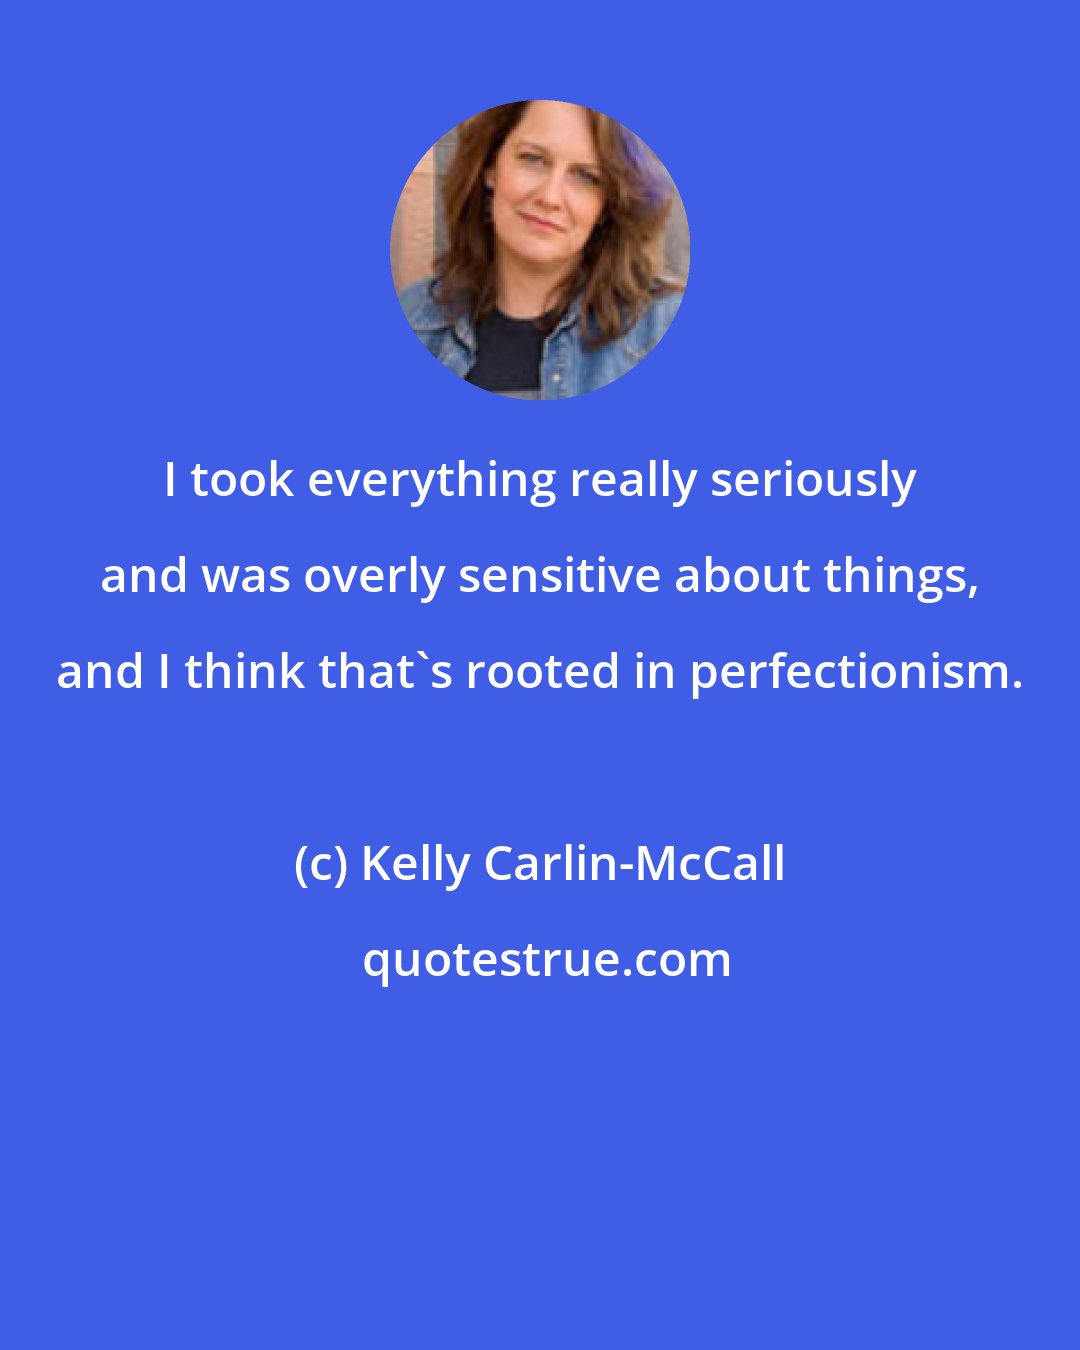 Kelly Carlin-McCall: I took everything really seriously and was overly sensitive about things, and I think that's rooted in perfectionism.